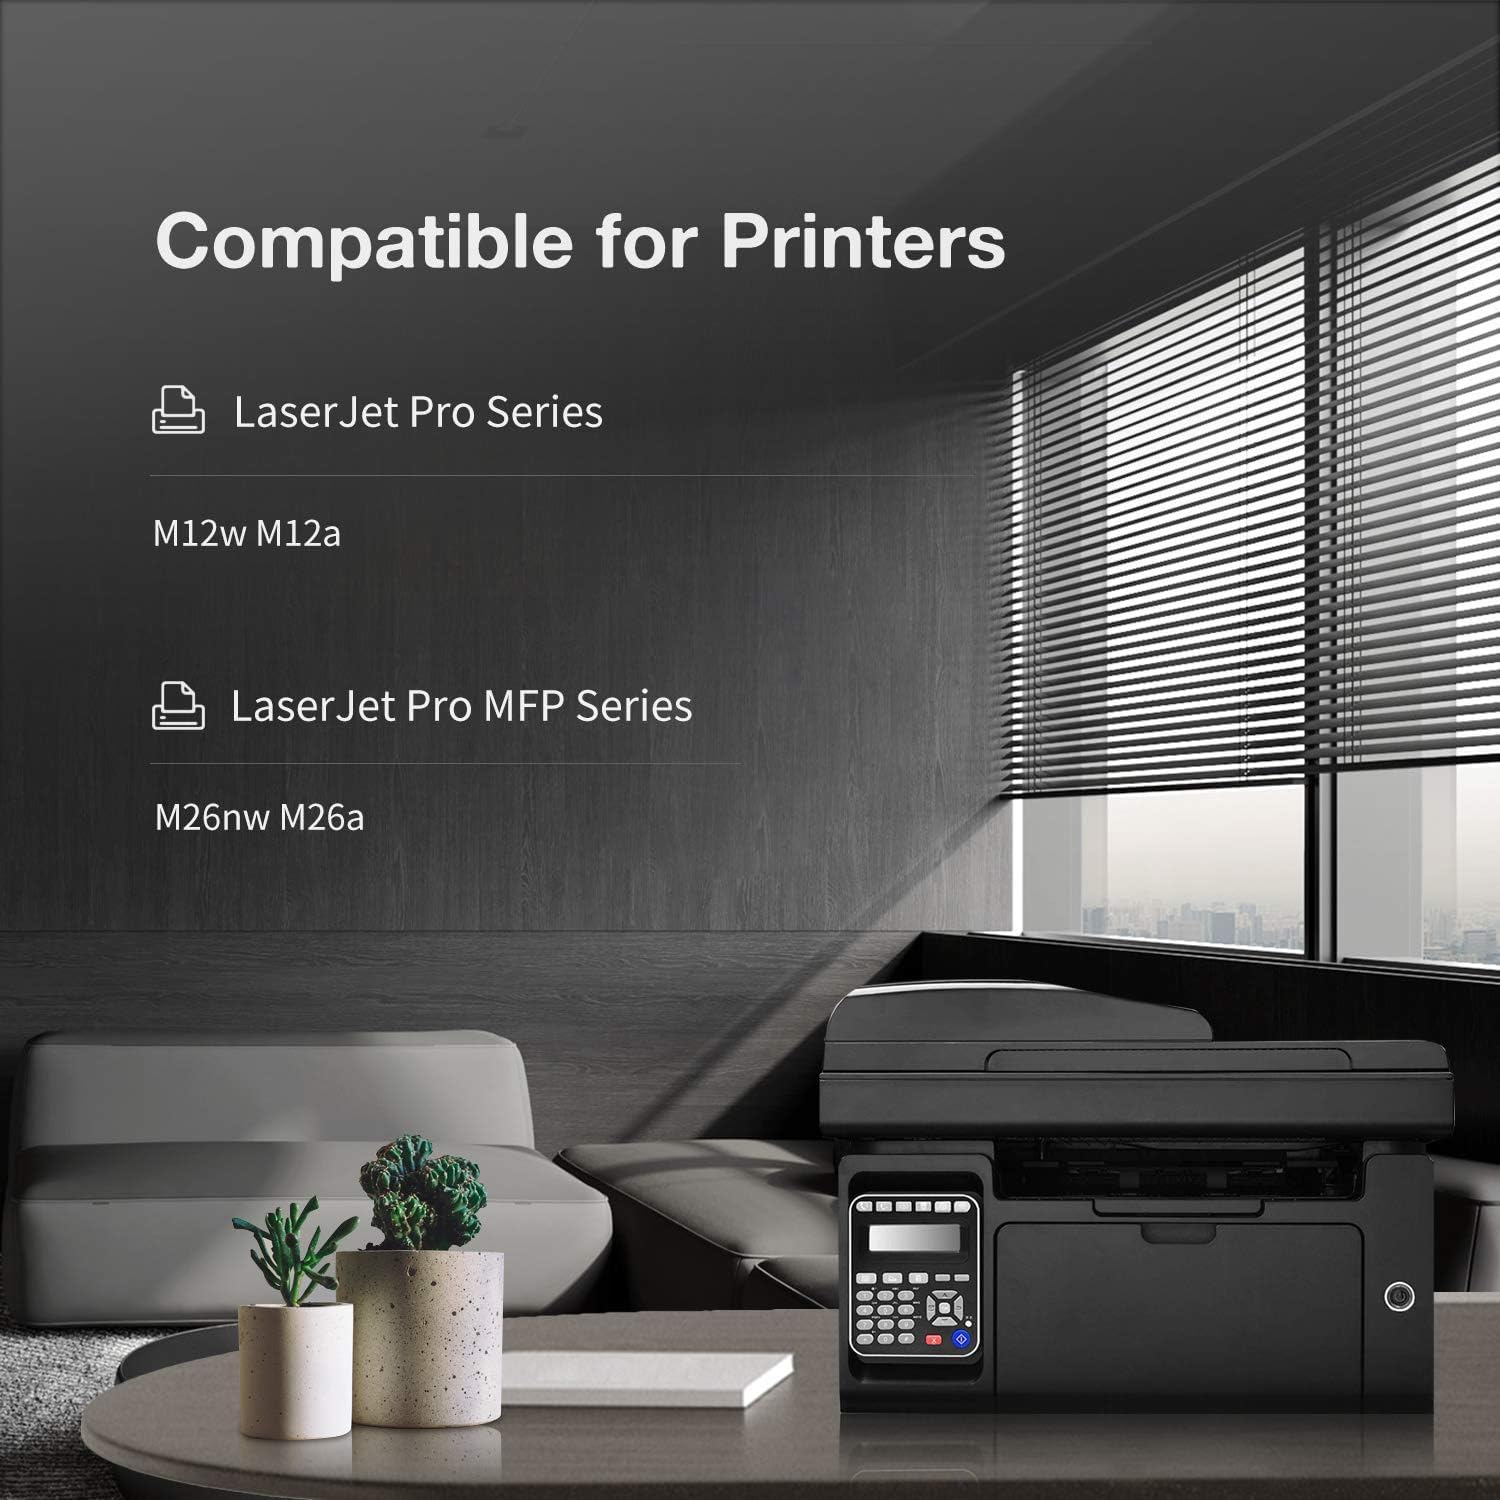 Compatible Printers for HP 79A Toner Cartridge: Modern office setting showing the compatibility of HP 79A toner cartridges with HP LaserJet Pro Series printers, enhancing workplace efficiency.